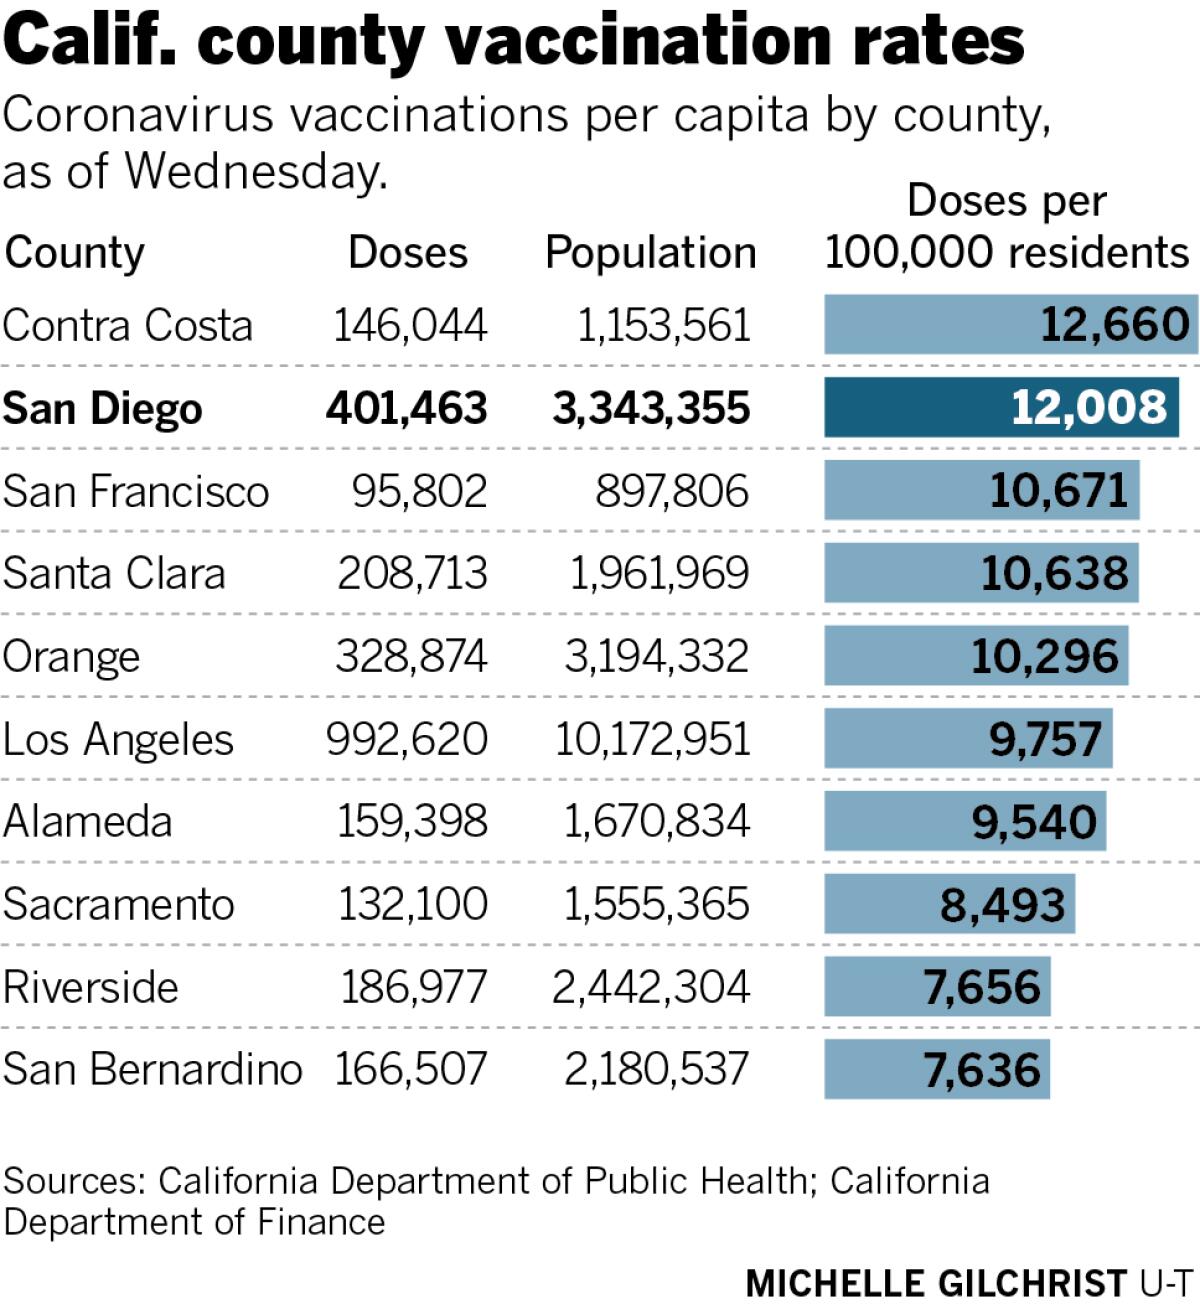 California counties vaccination rates chart